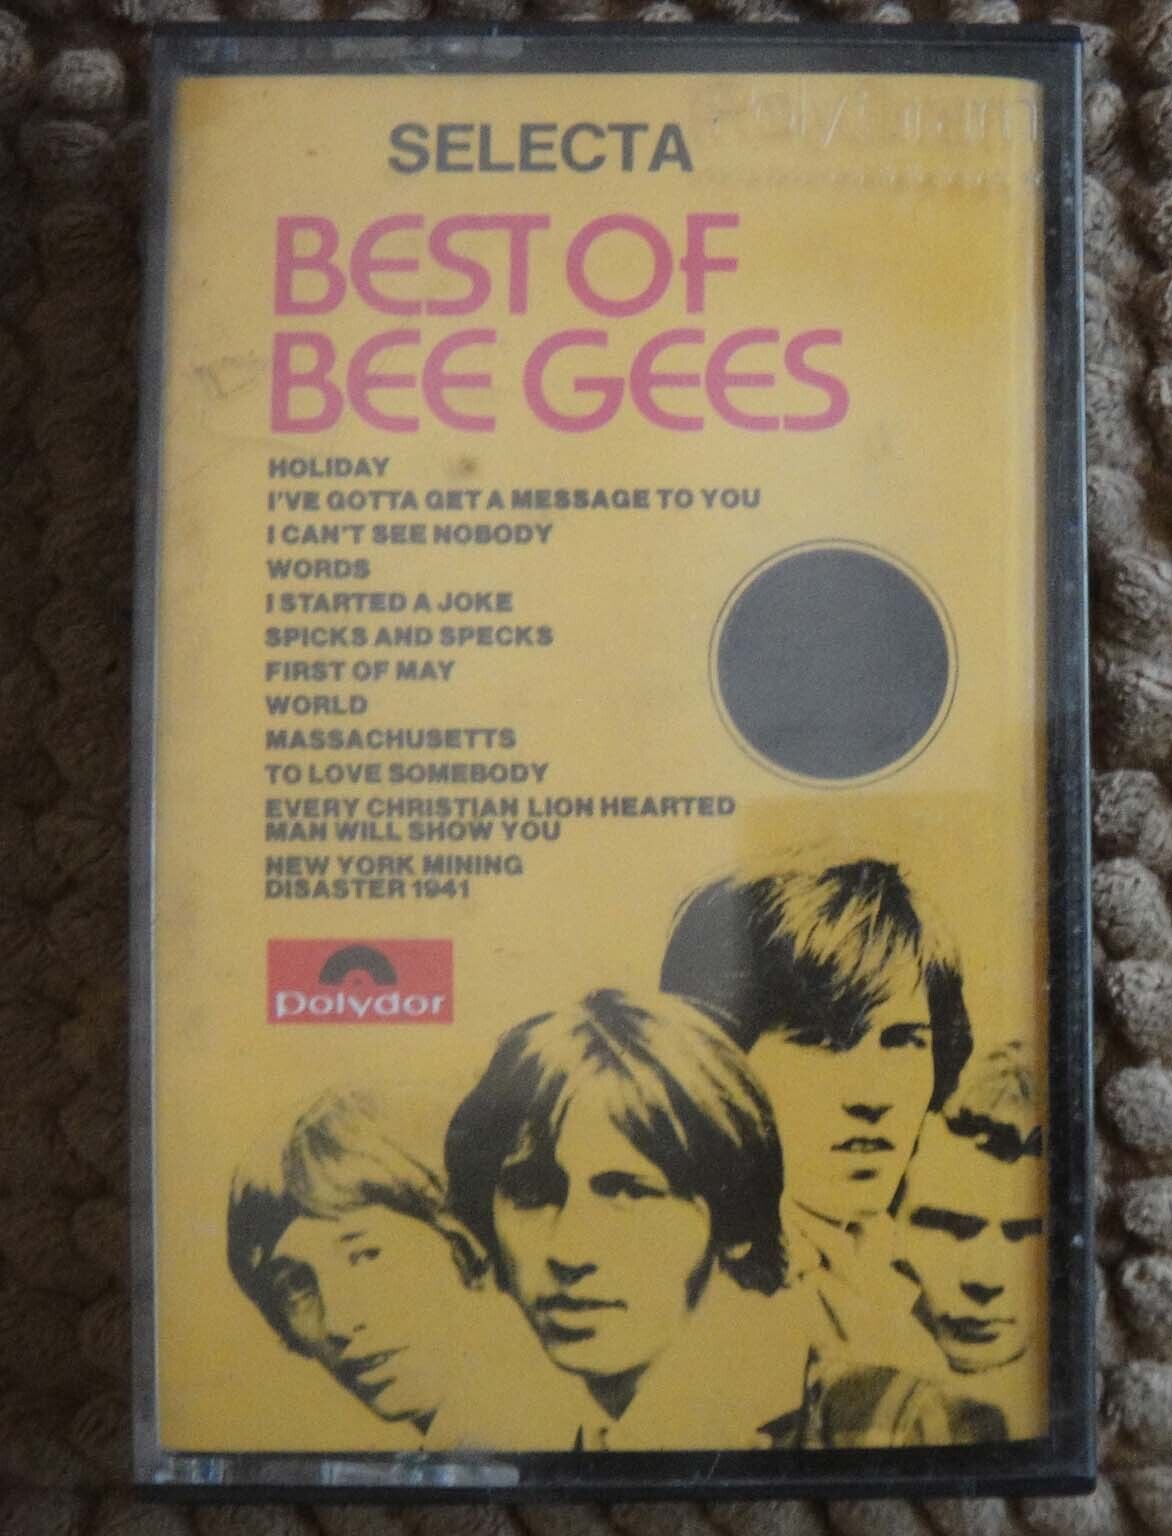 (1135) Malaysia Polydor Cassette Tape - BEST OF BEE GEES